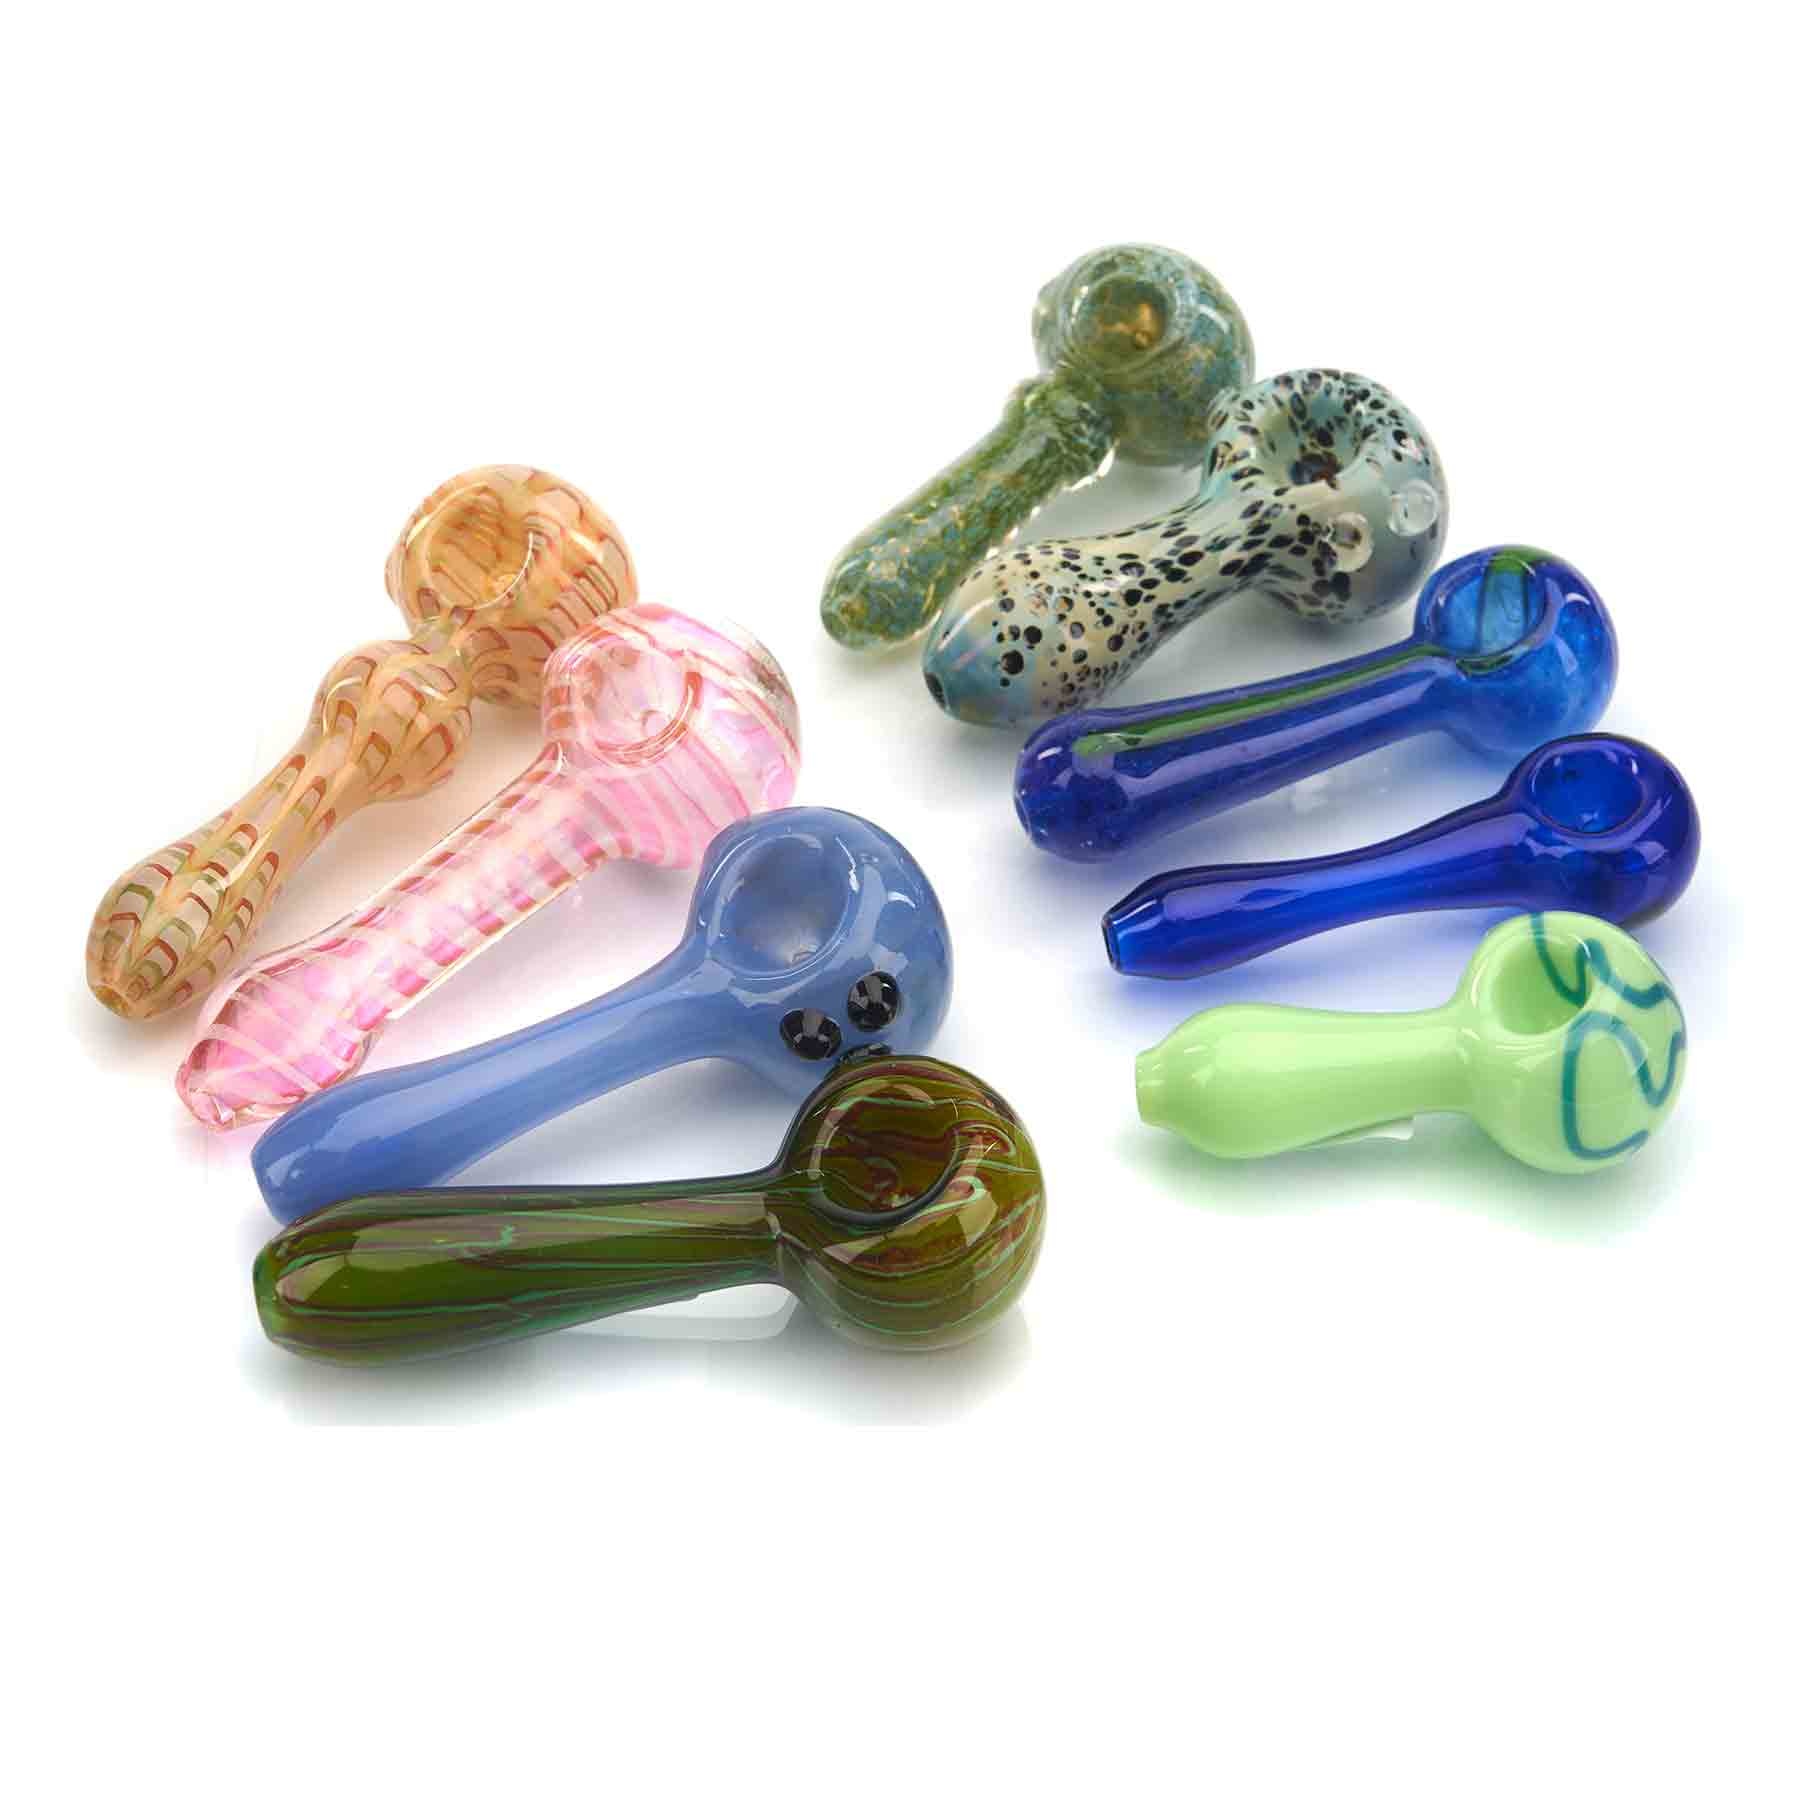 Hand Pipe $20 - SBK International Wholesale: Water Pipes, glass, hookah,  vape, supreme whip. The best wholesale prices for retailers in smoke shop,  head shops, vape shops, and